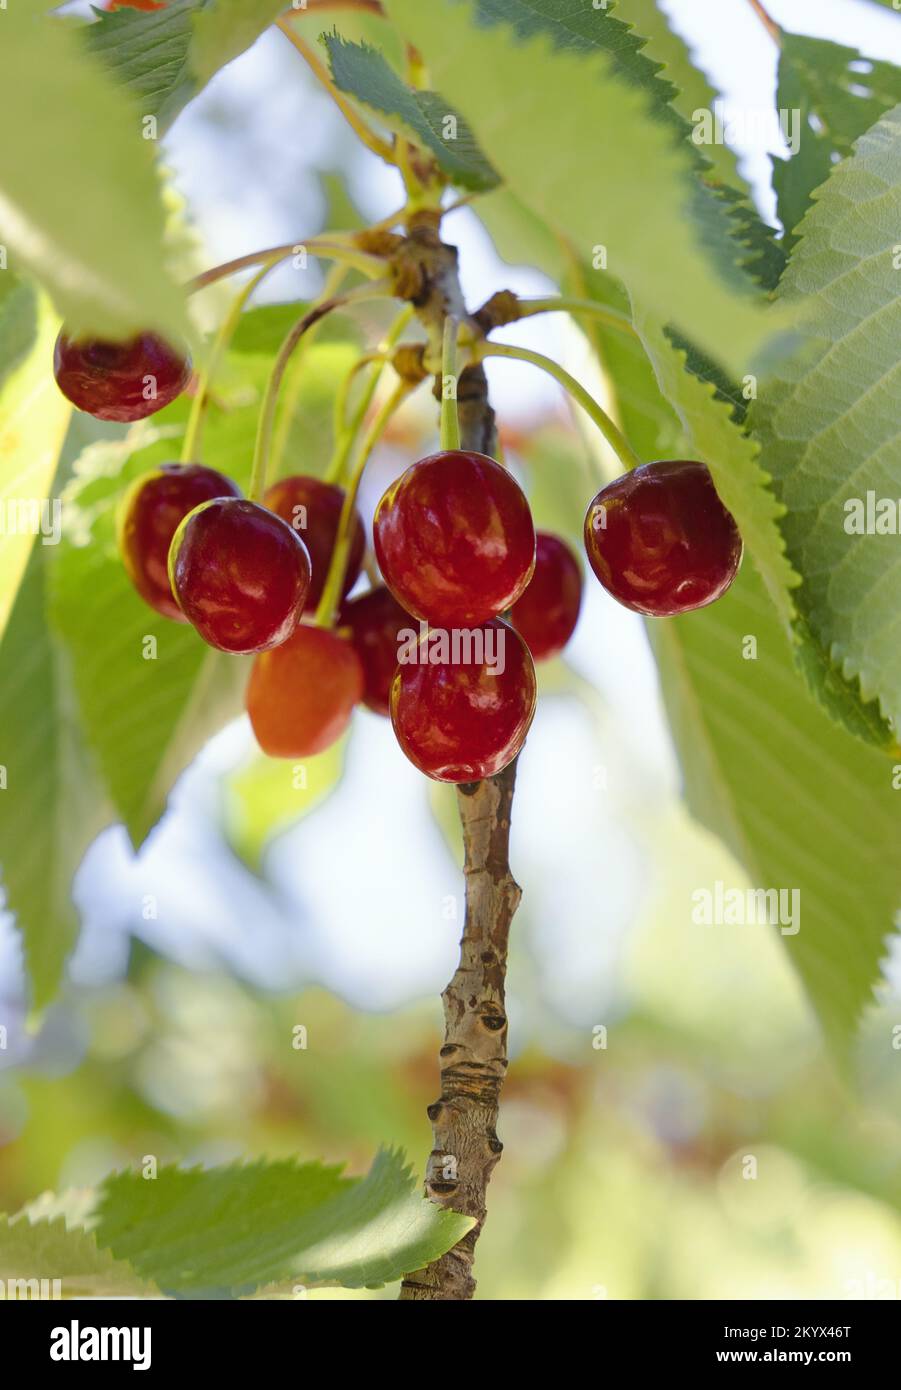 red cherry on the tree close-up Stock Photo